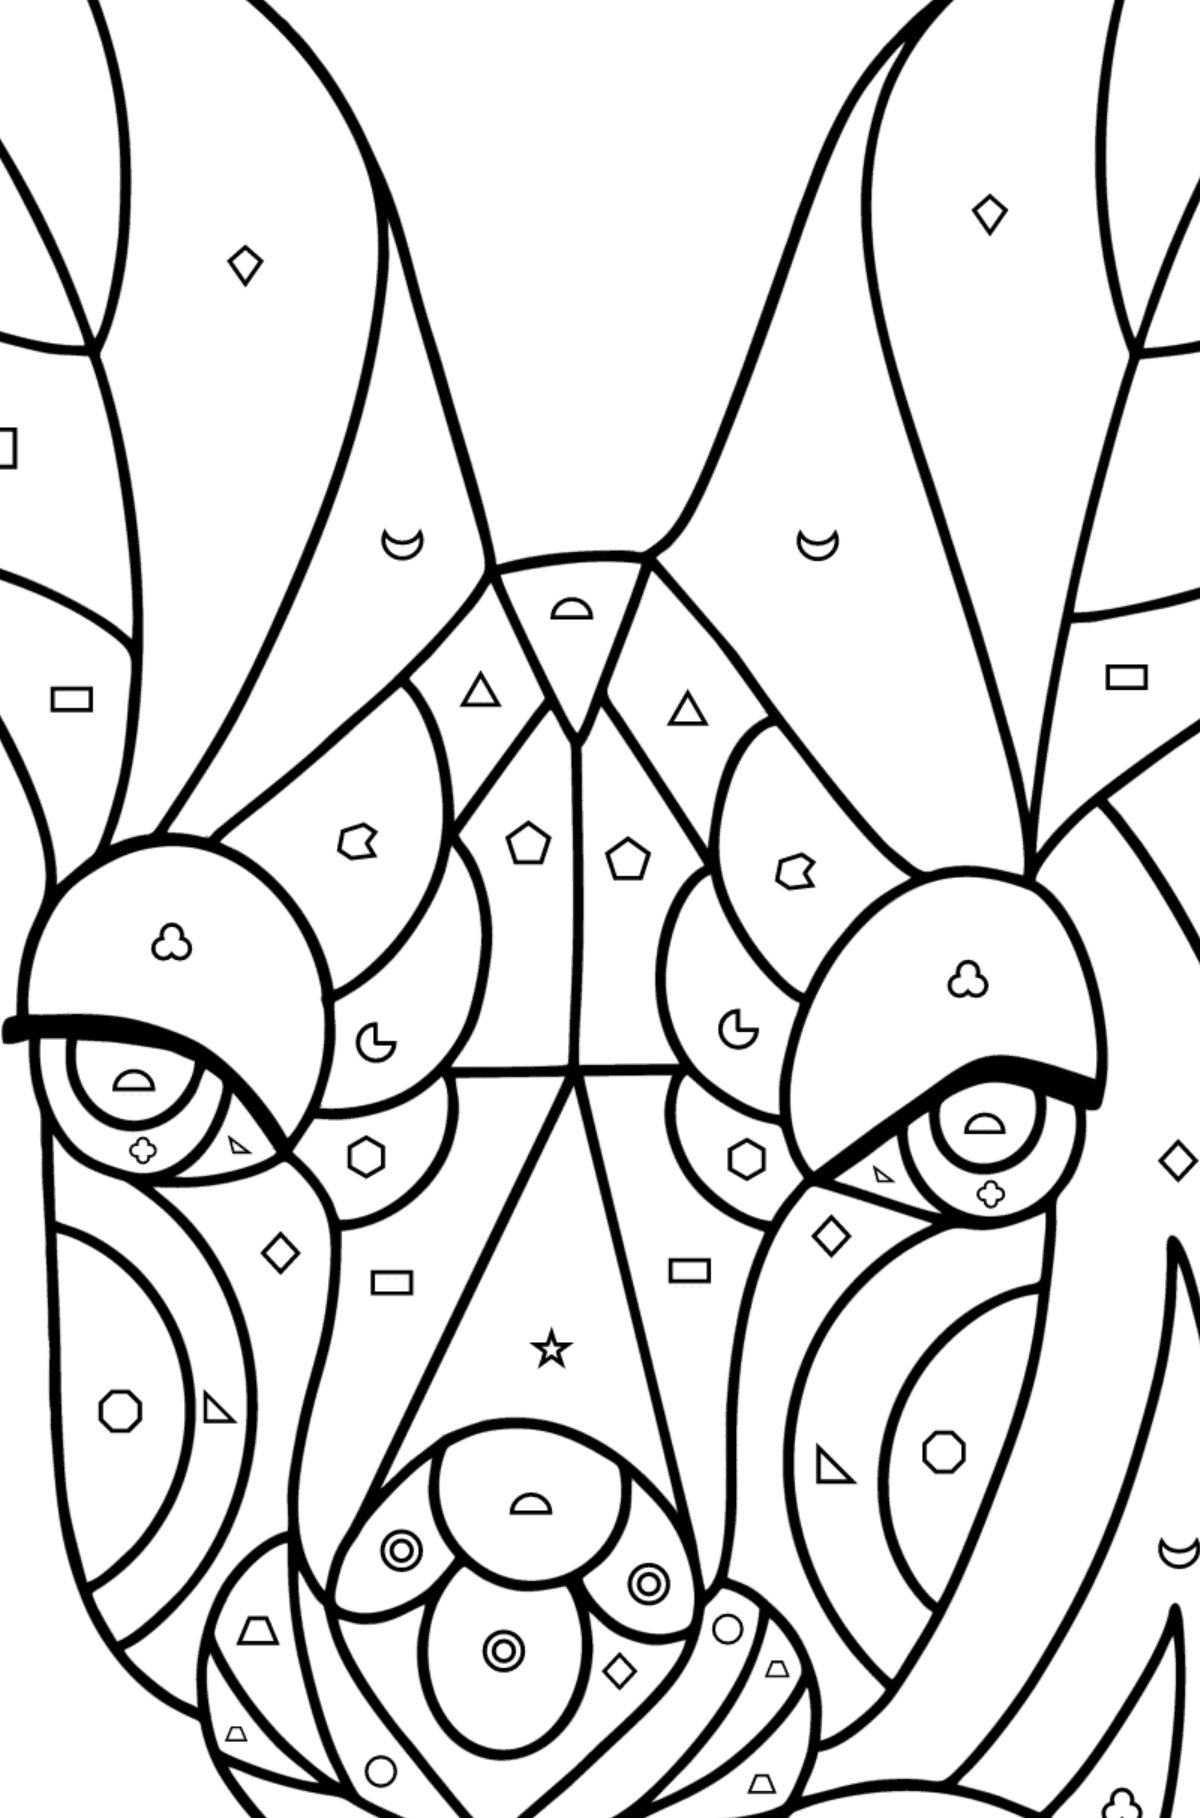 Antistress Kangaroo coloring page - Coloring by Geometric Shapes for Kids